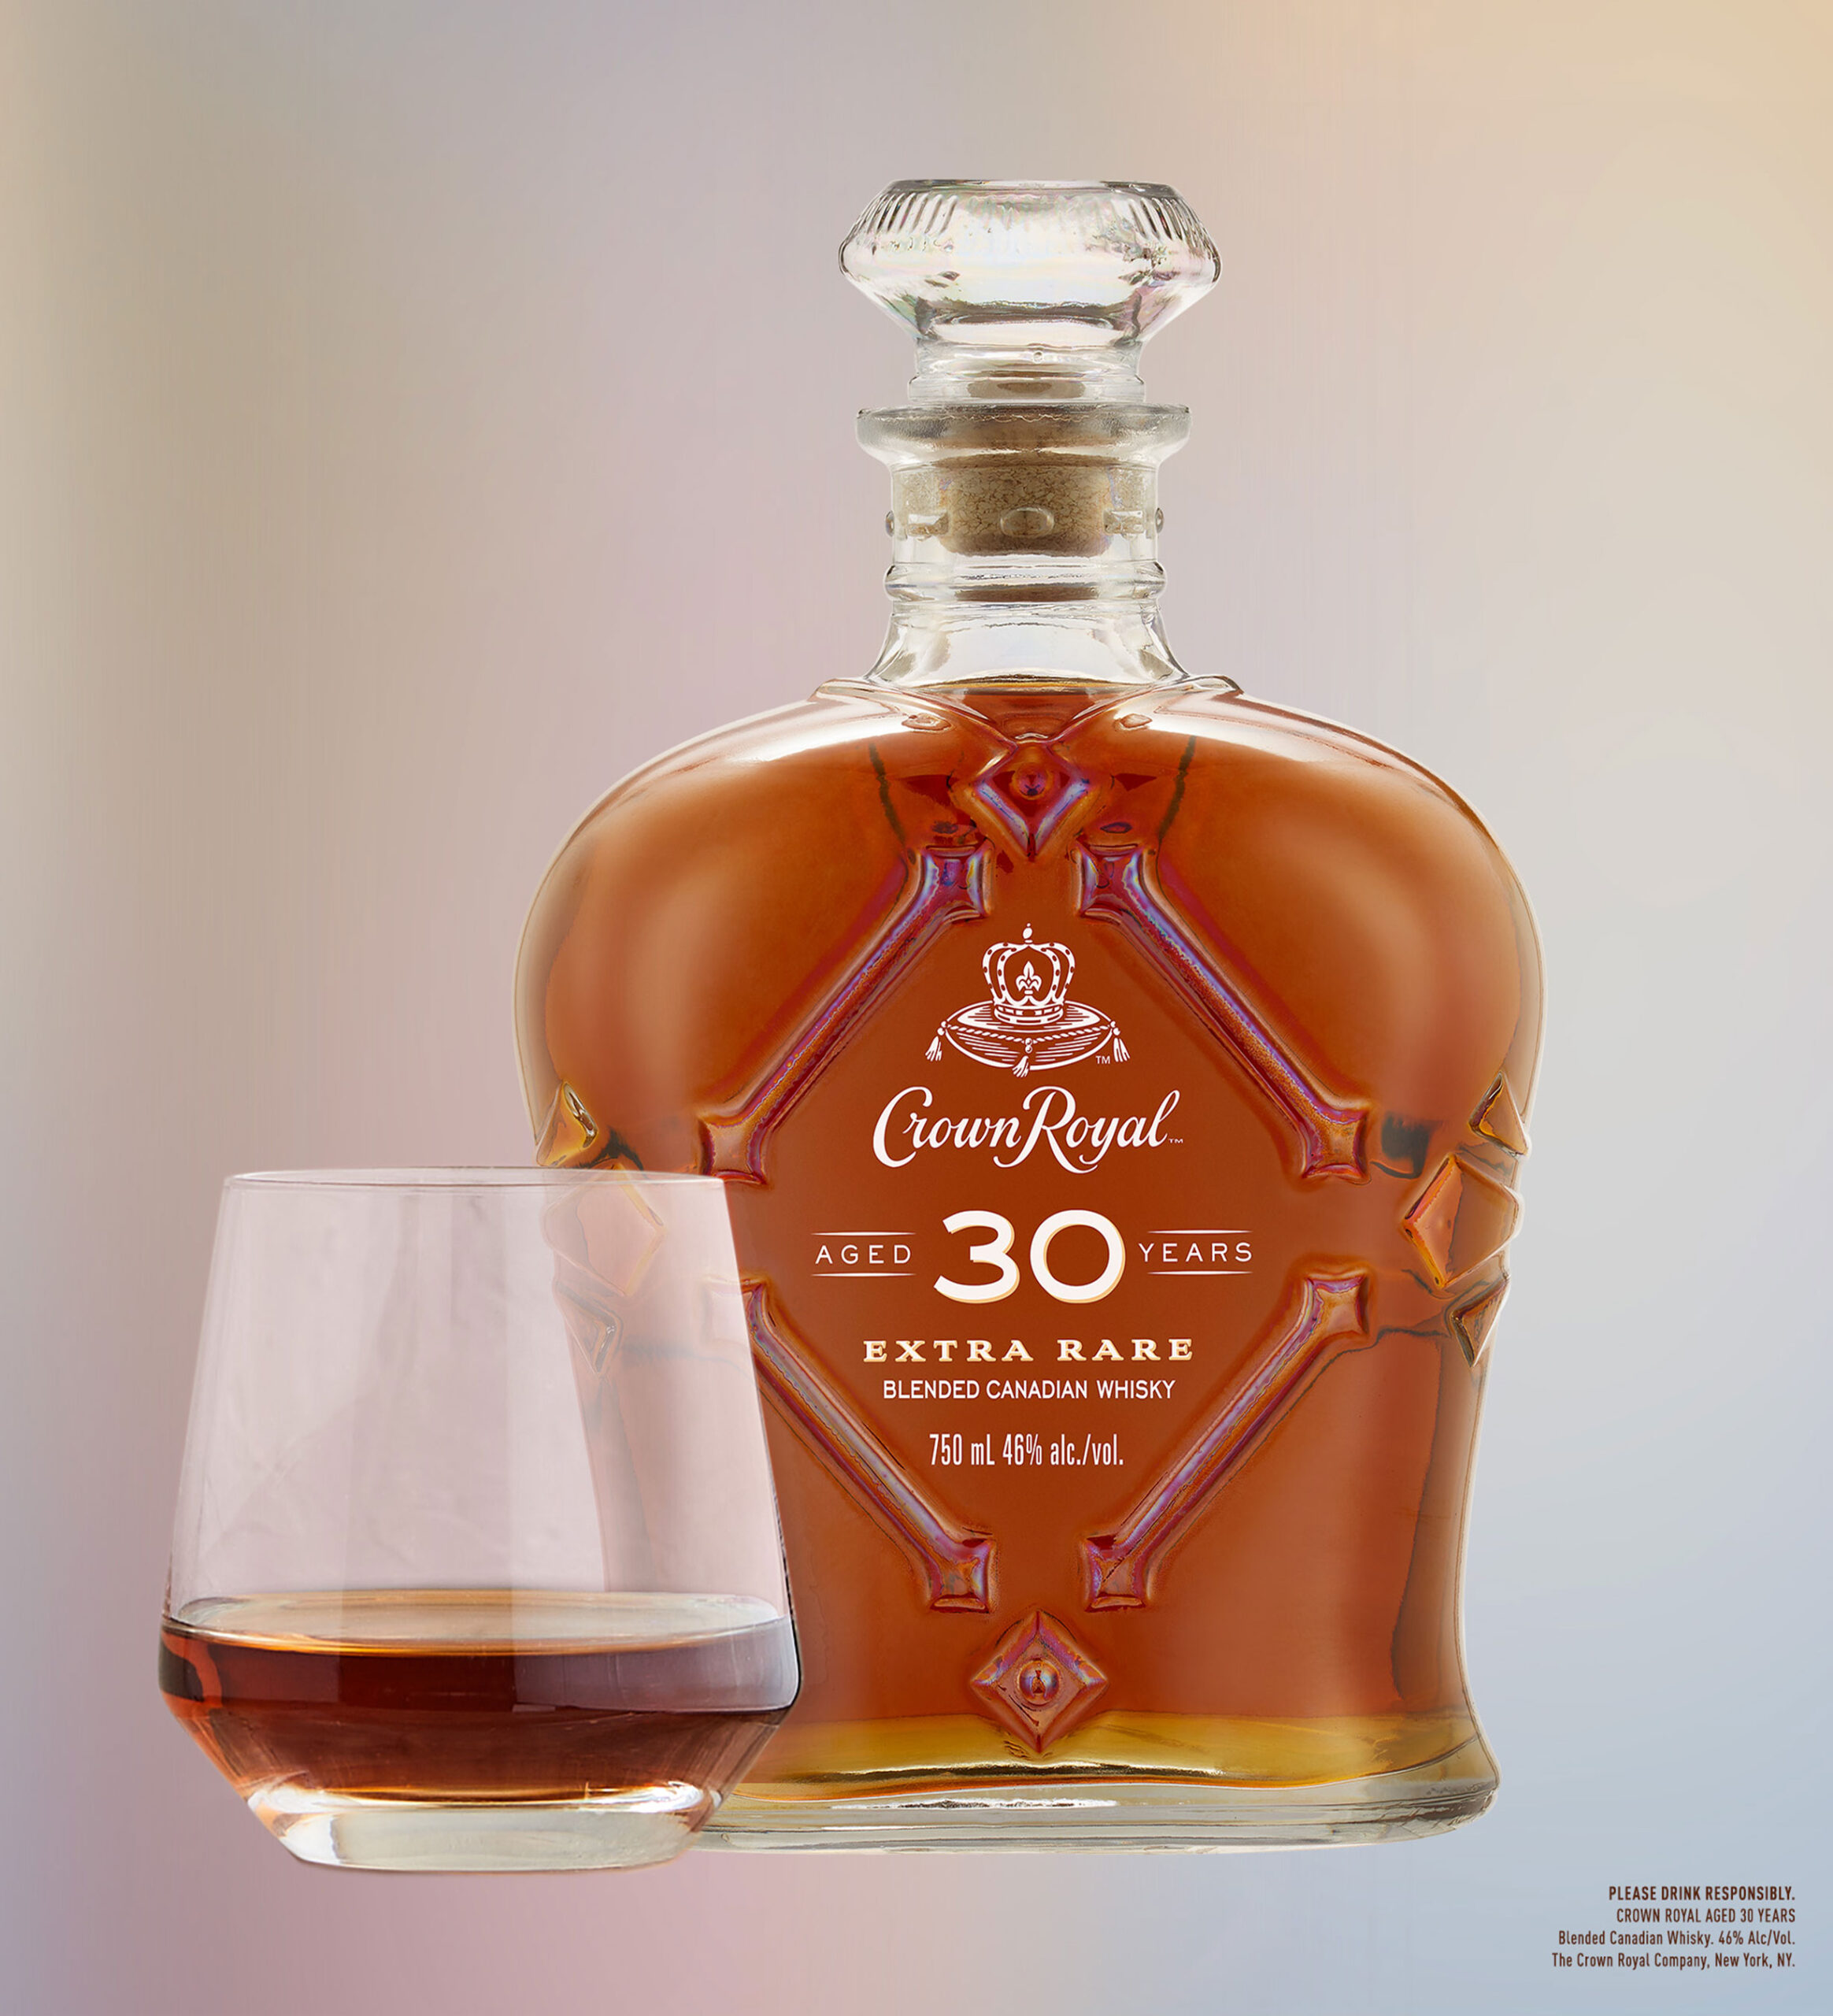 Crown Royal Introduces New Canadian Whisky Aged 30 Years